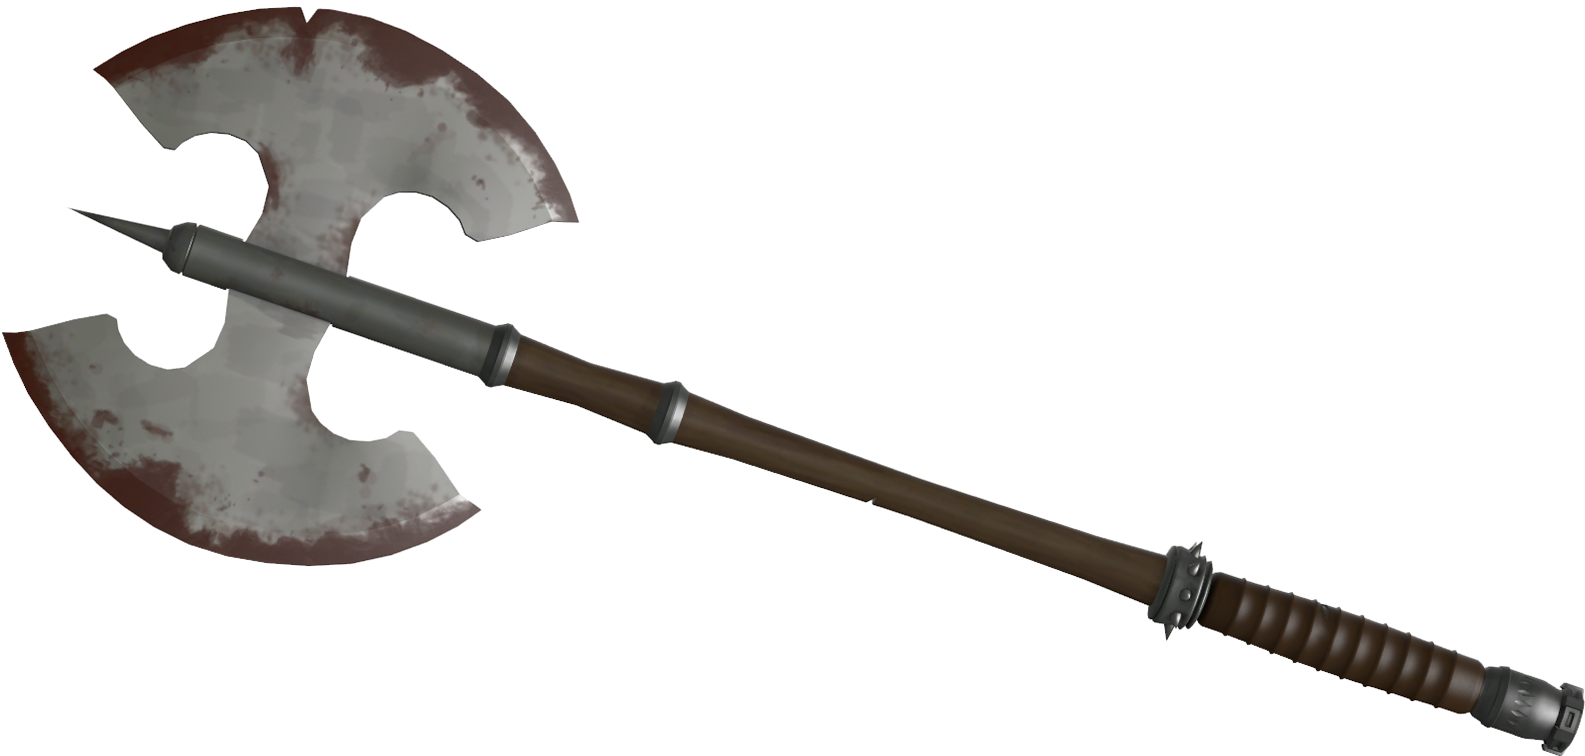 Weapon PNG